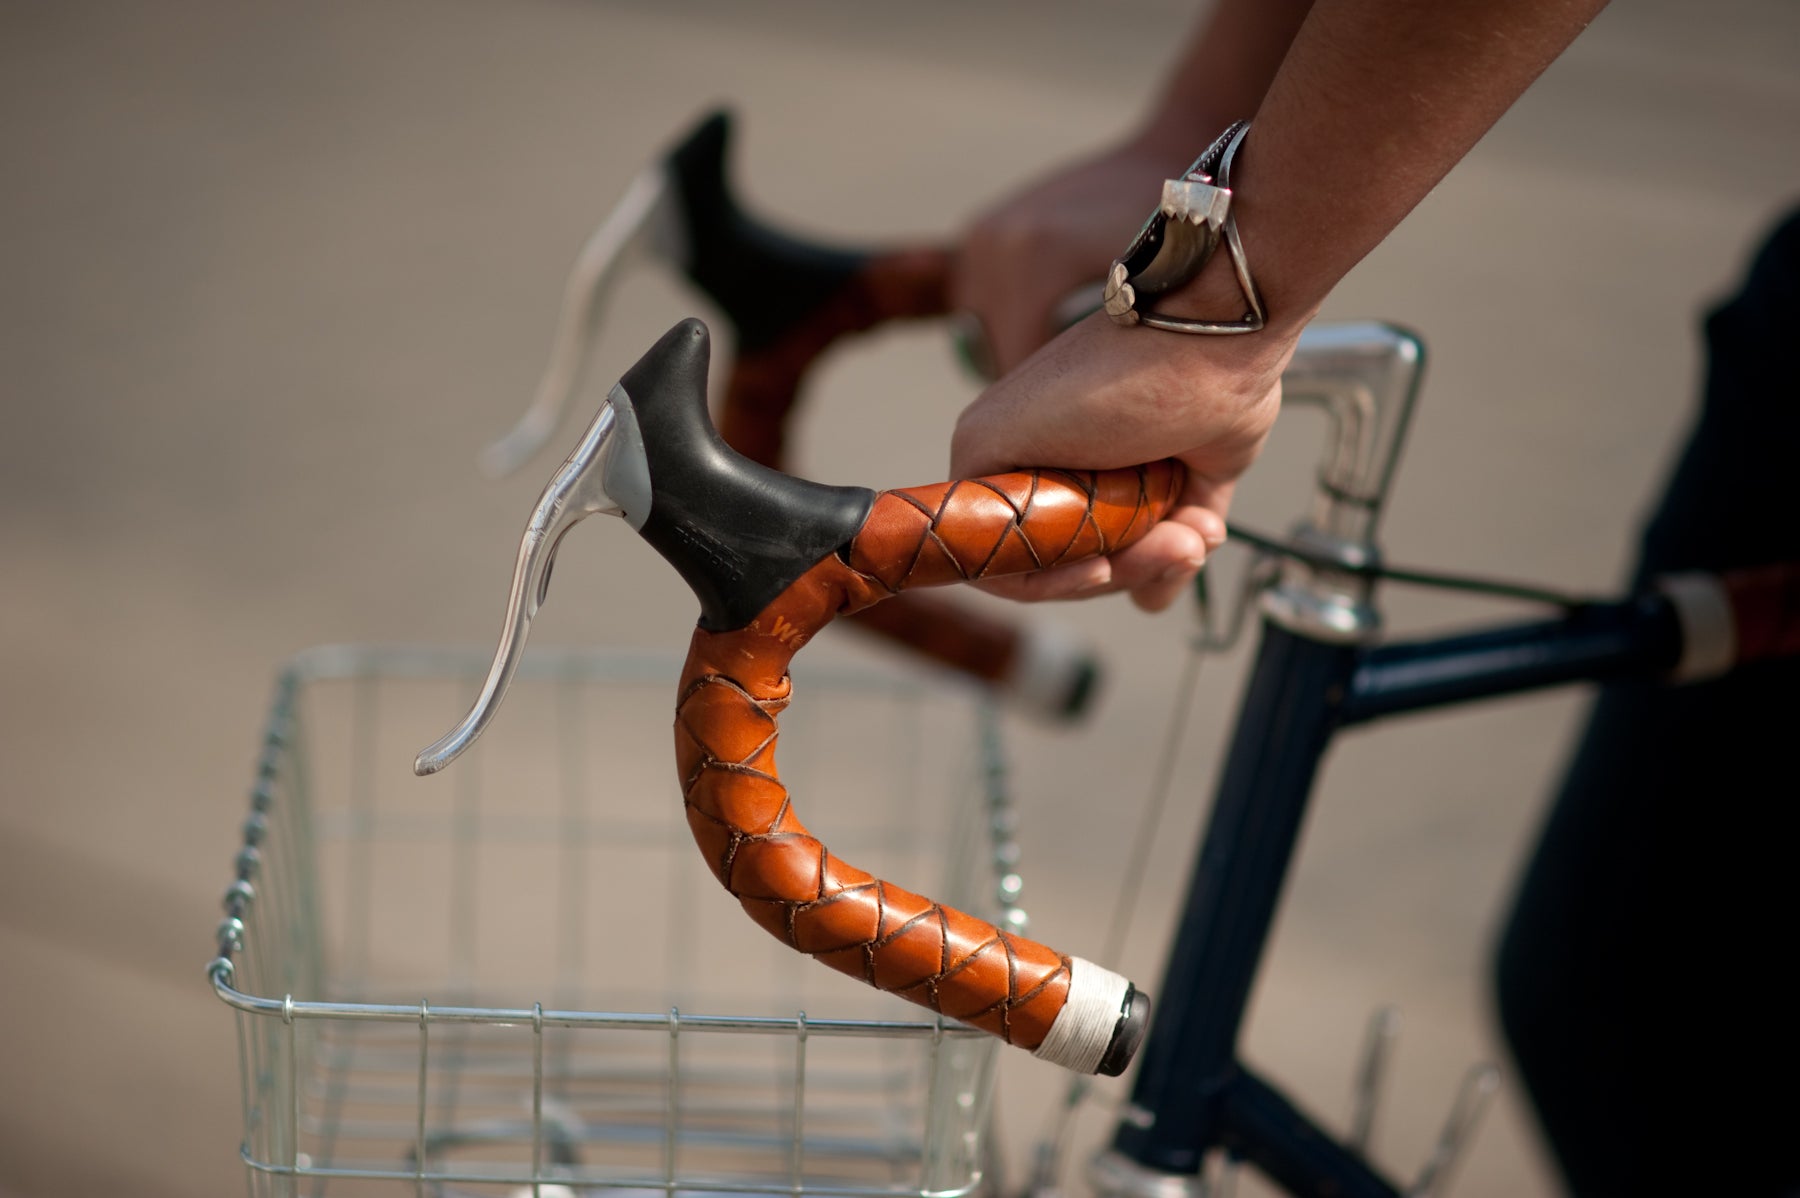 Introducing a new way to wrap your handlebars in leather: the Bullwhip Bar Wrap